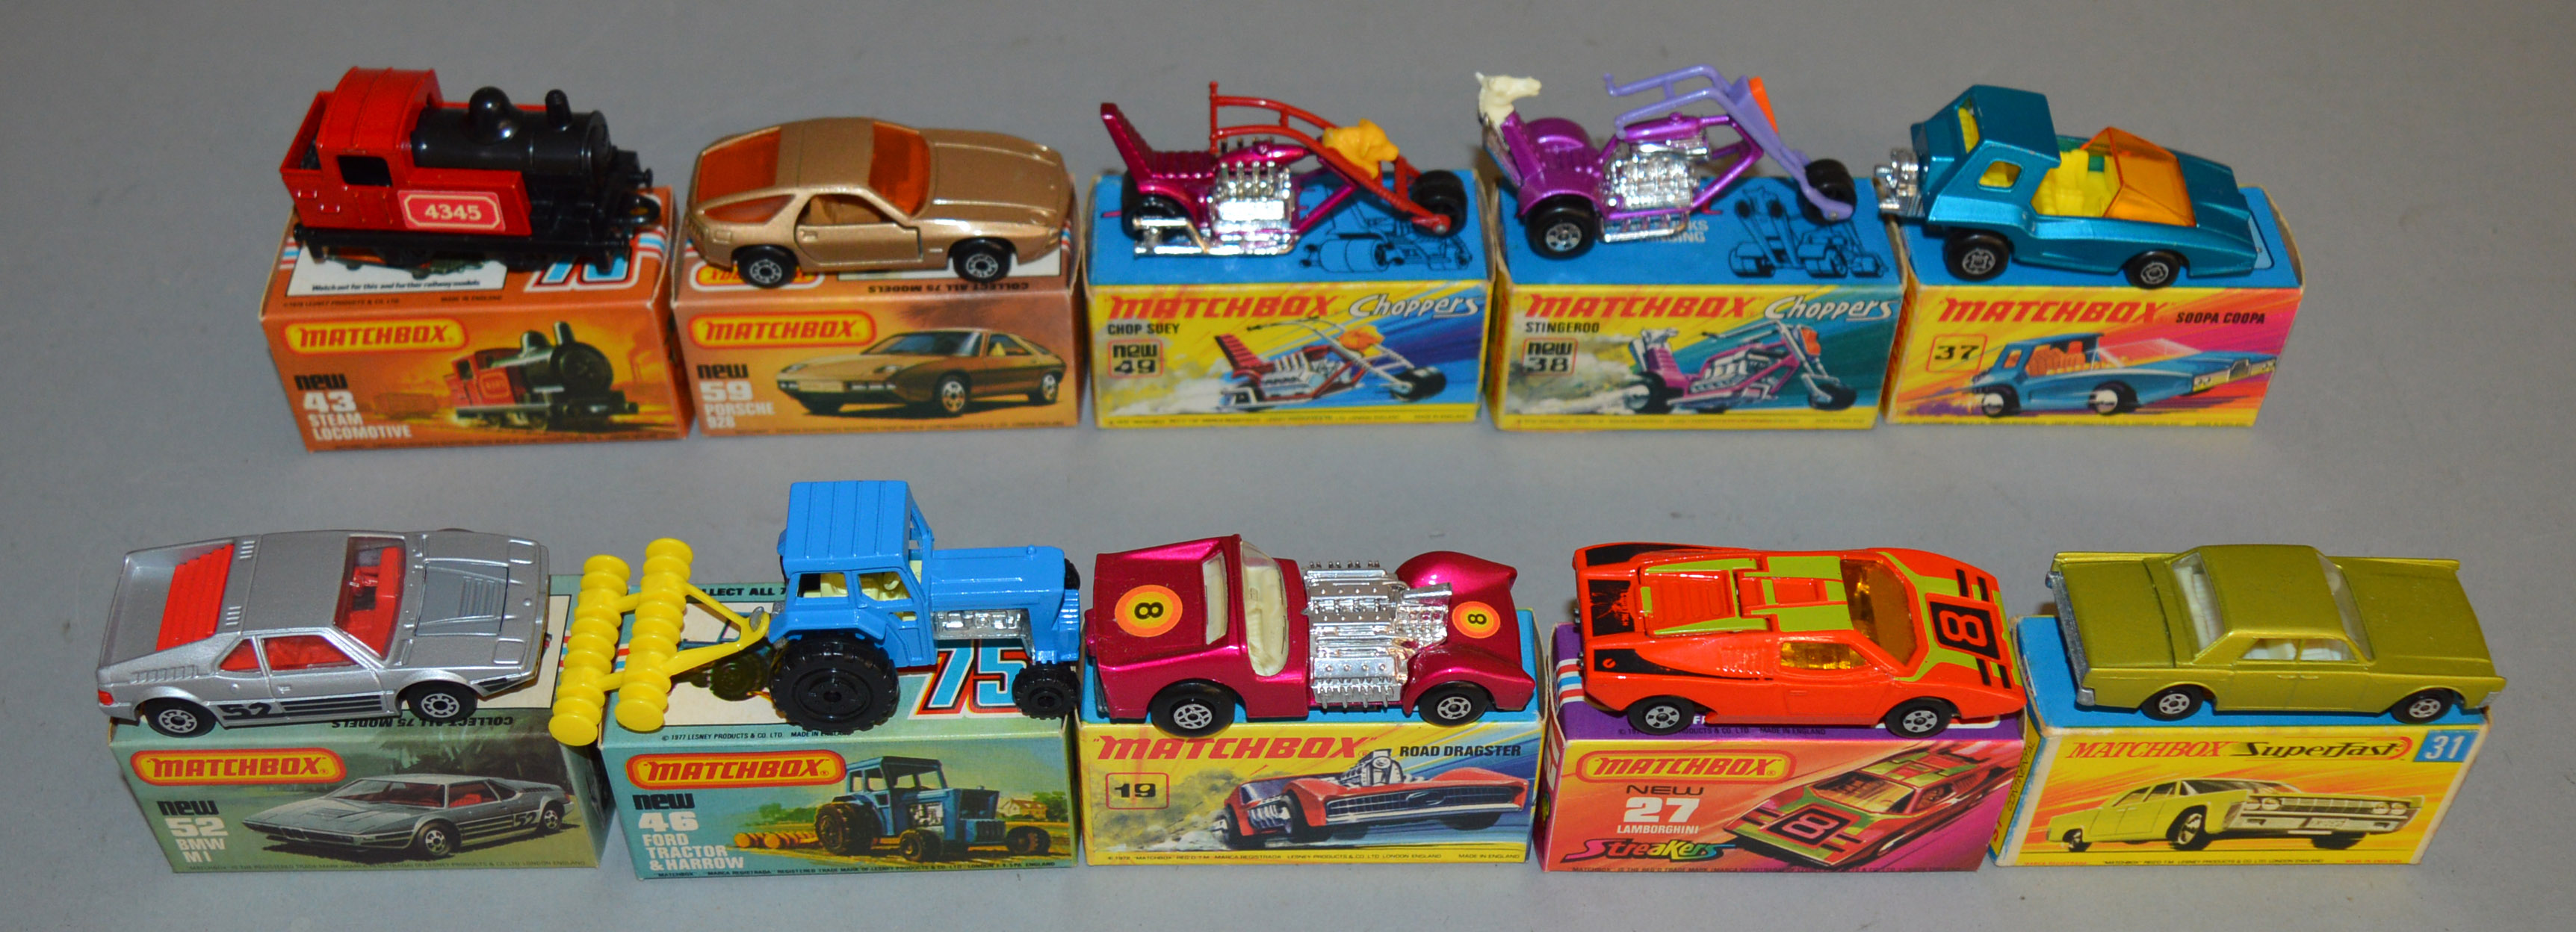 10 Matchbox Superfast diecast models including 19 Road Dragster, 27, 31 Lincoln Continental, 37,